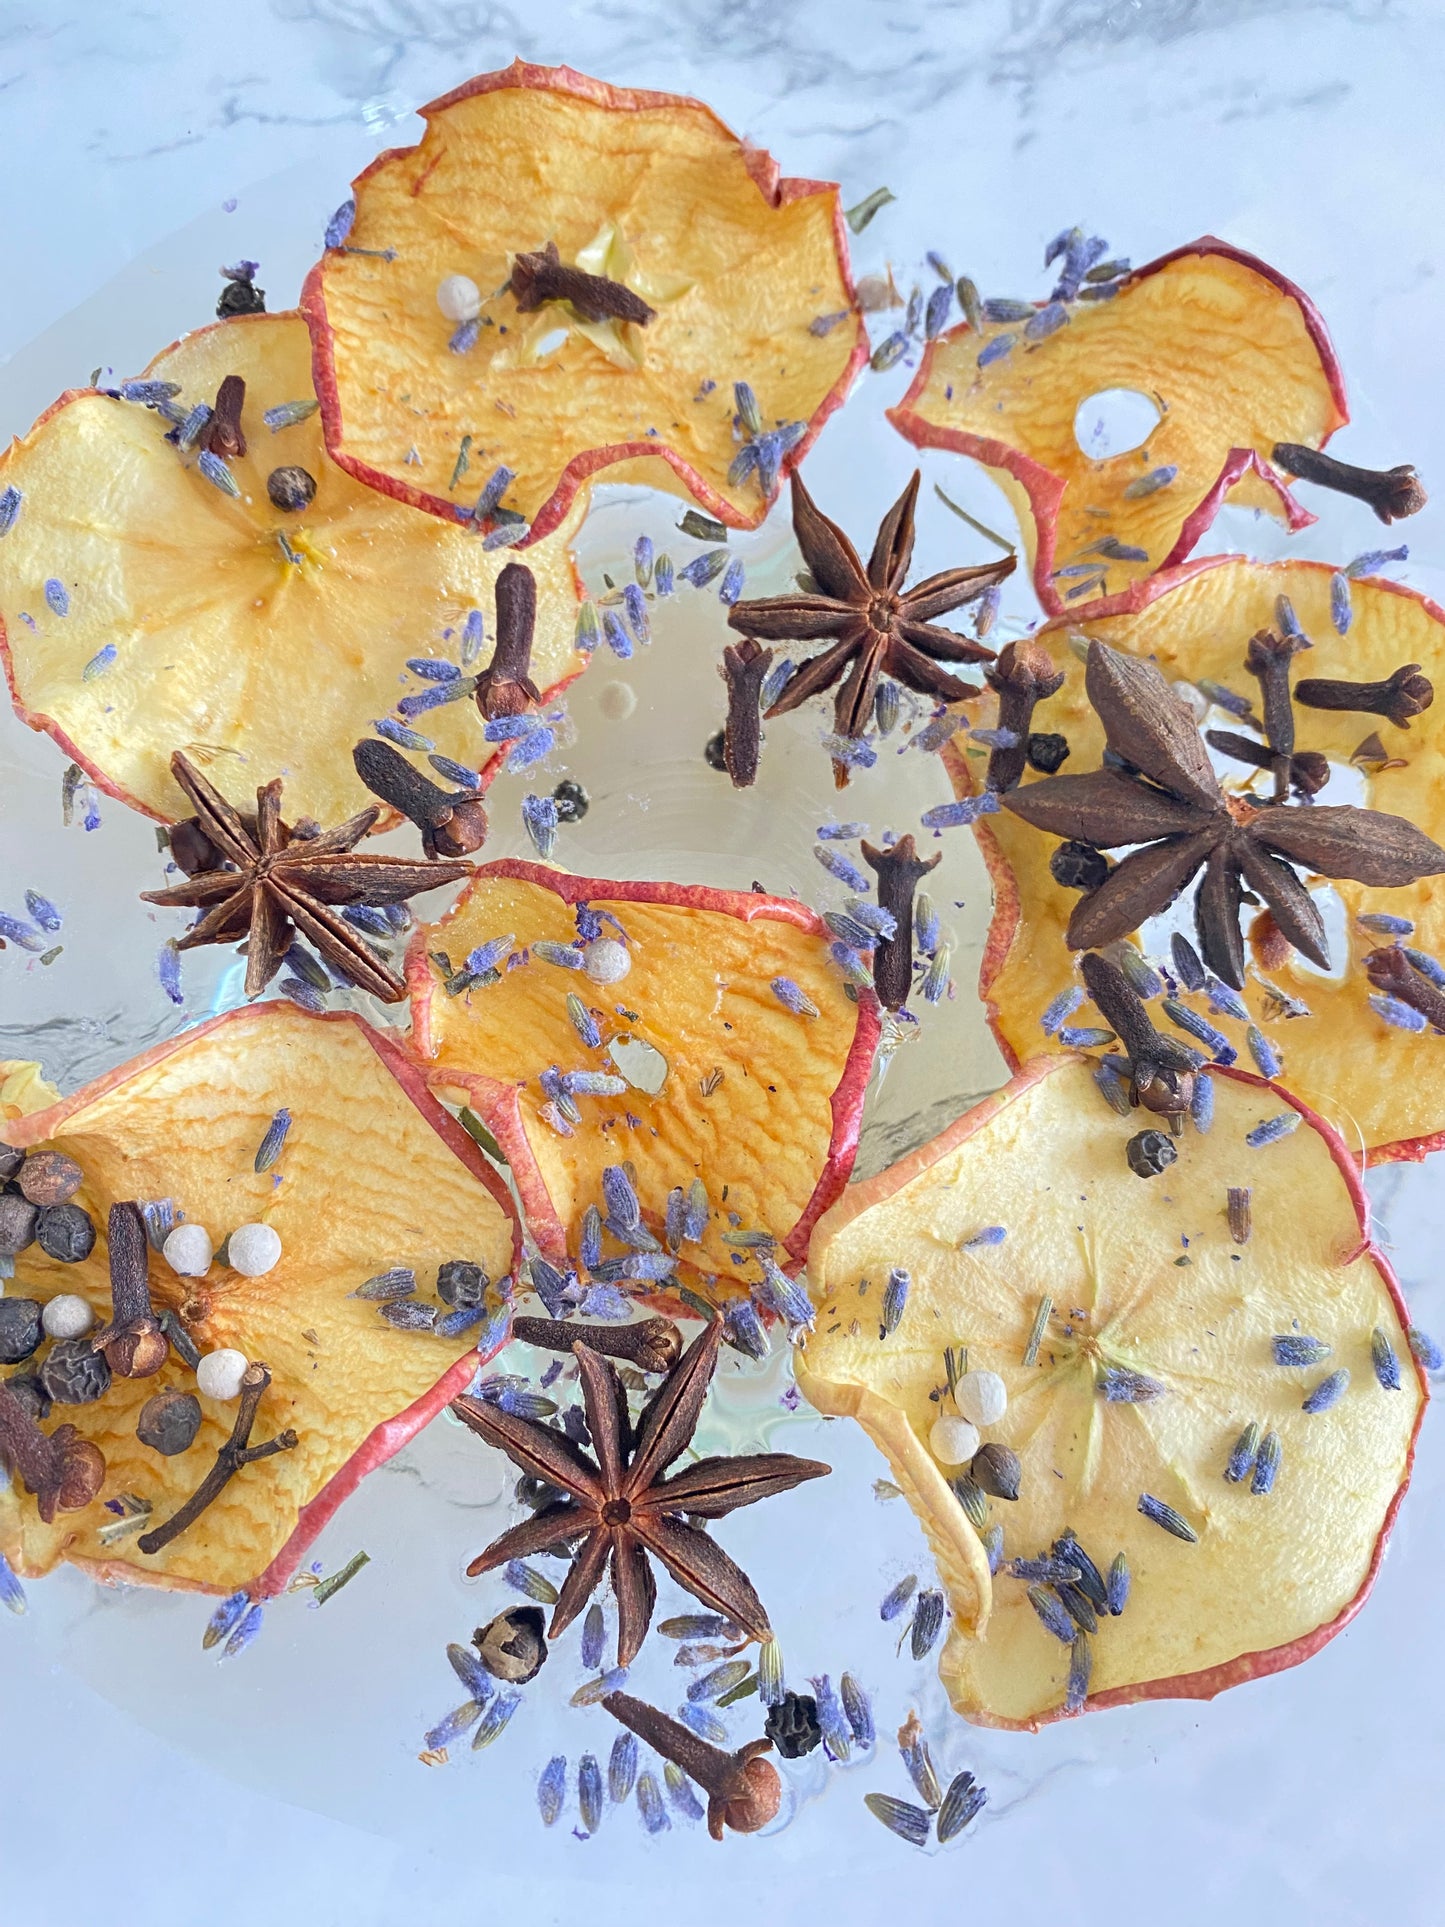 Stove Top Potpourri Summer Spice Apples & Spice Simmer Pot w/ a mixture of Dried Apples & Star Anise, Lavender, Peppercorns and Cloves/All Natural Gift